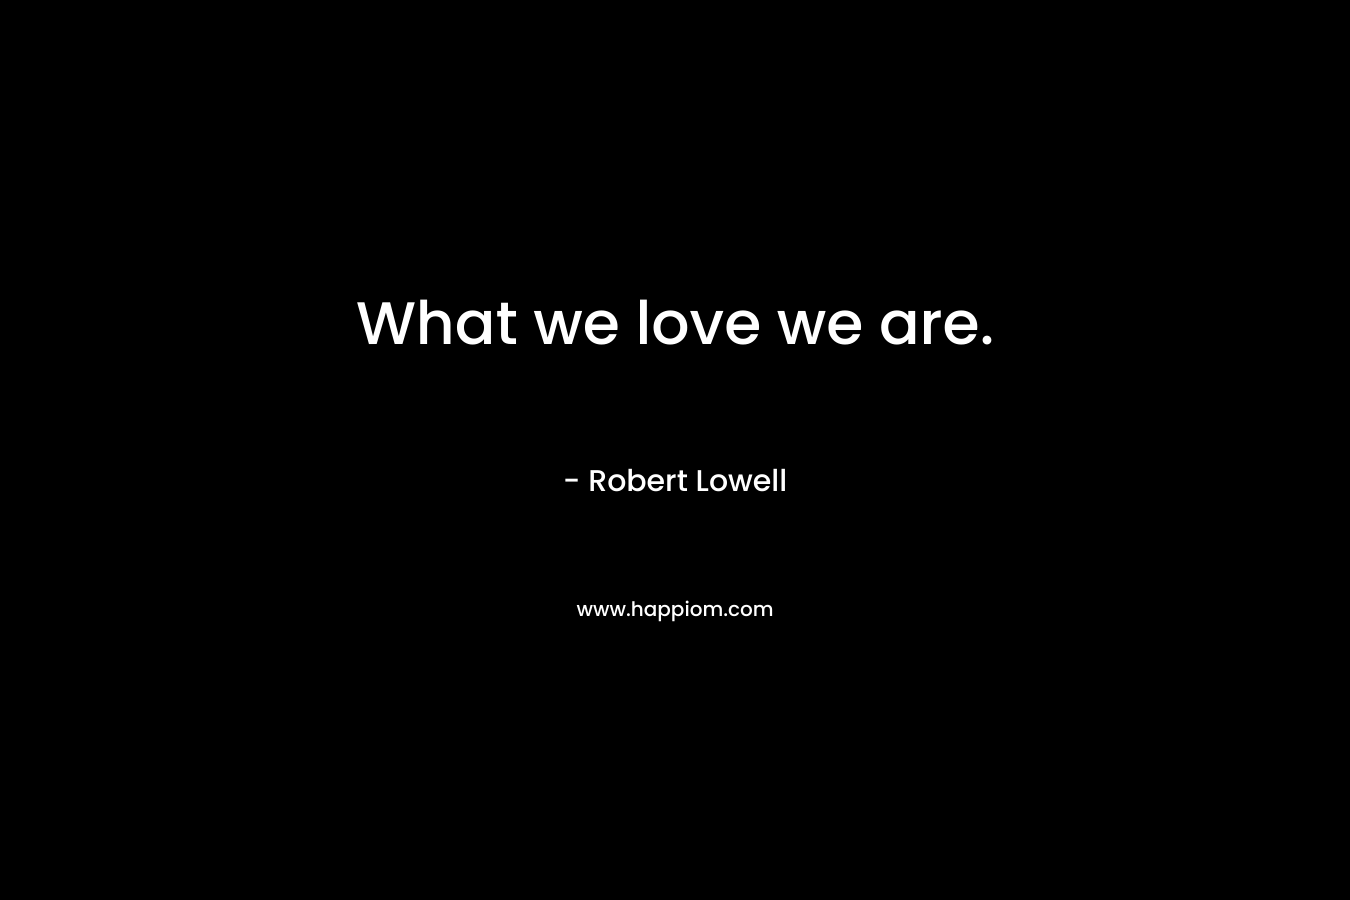 What we love we are.